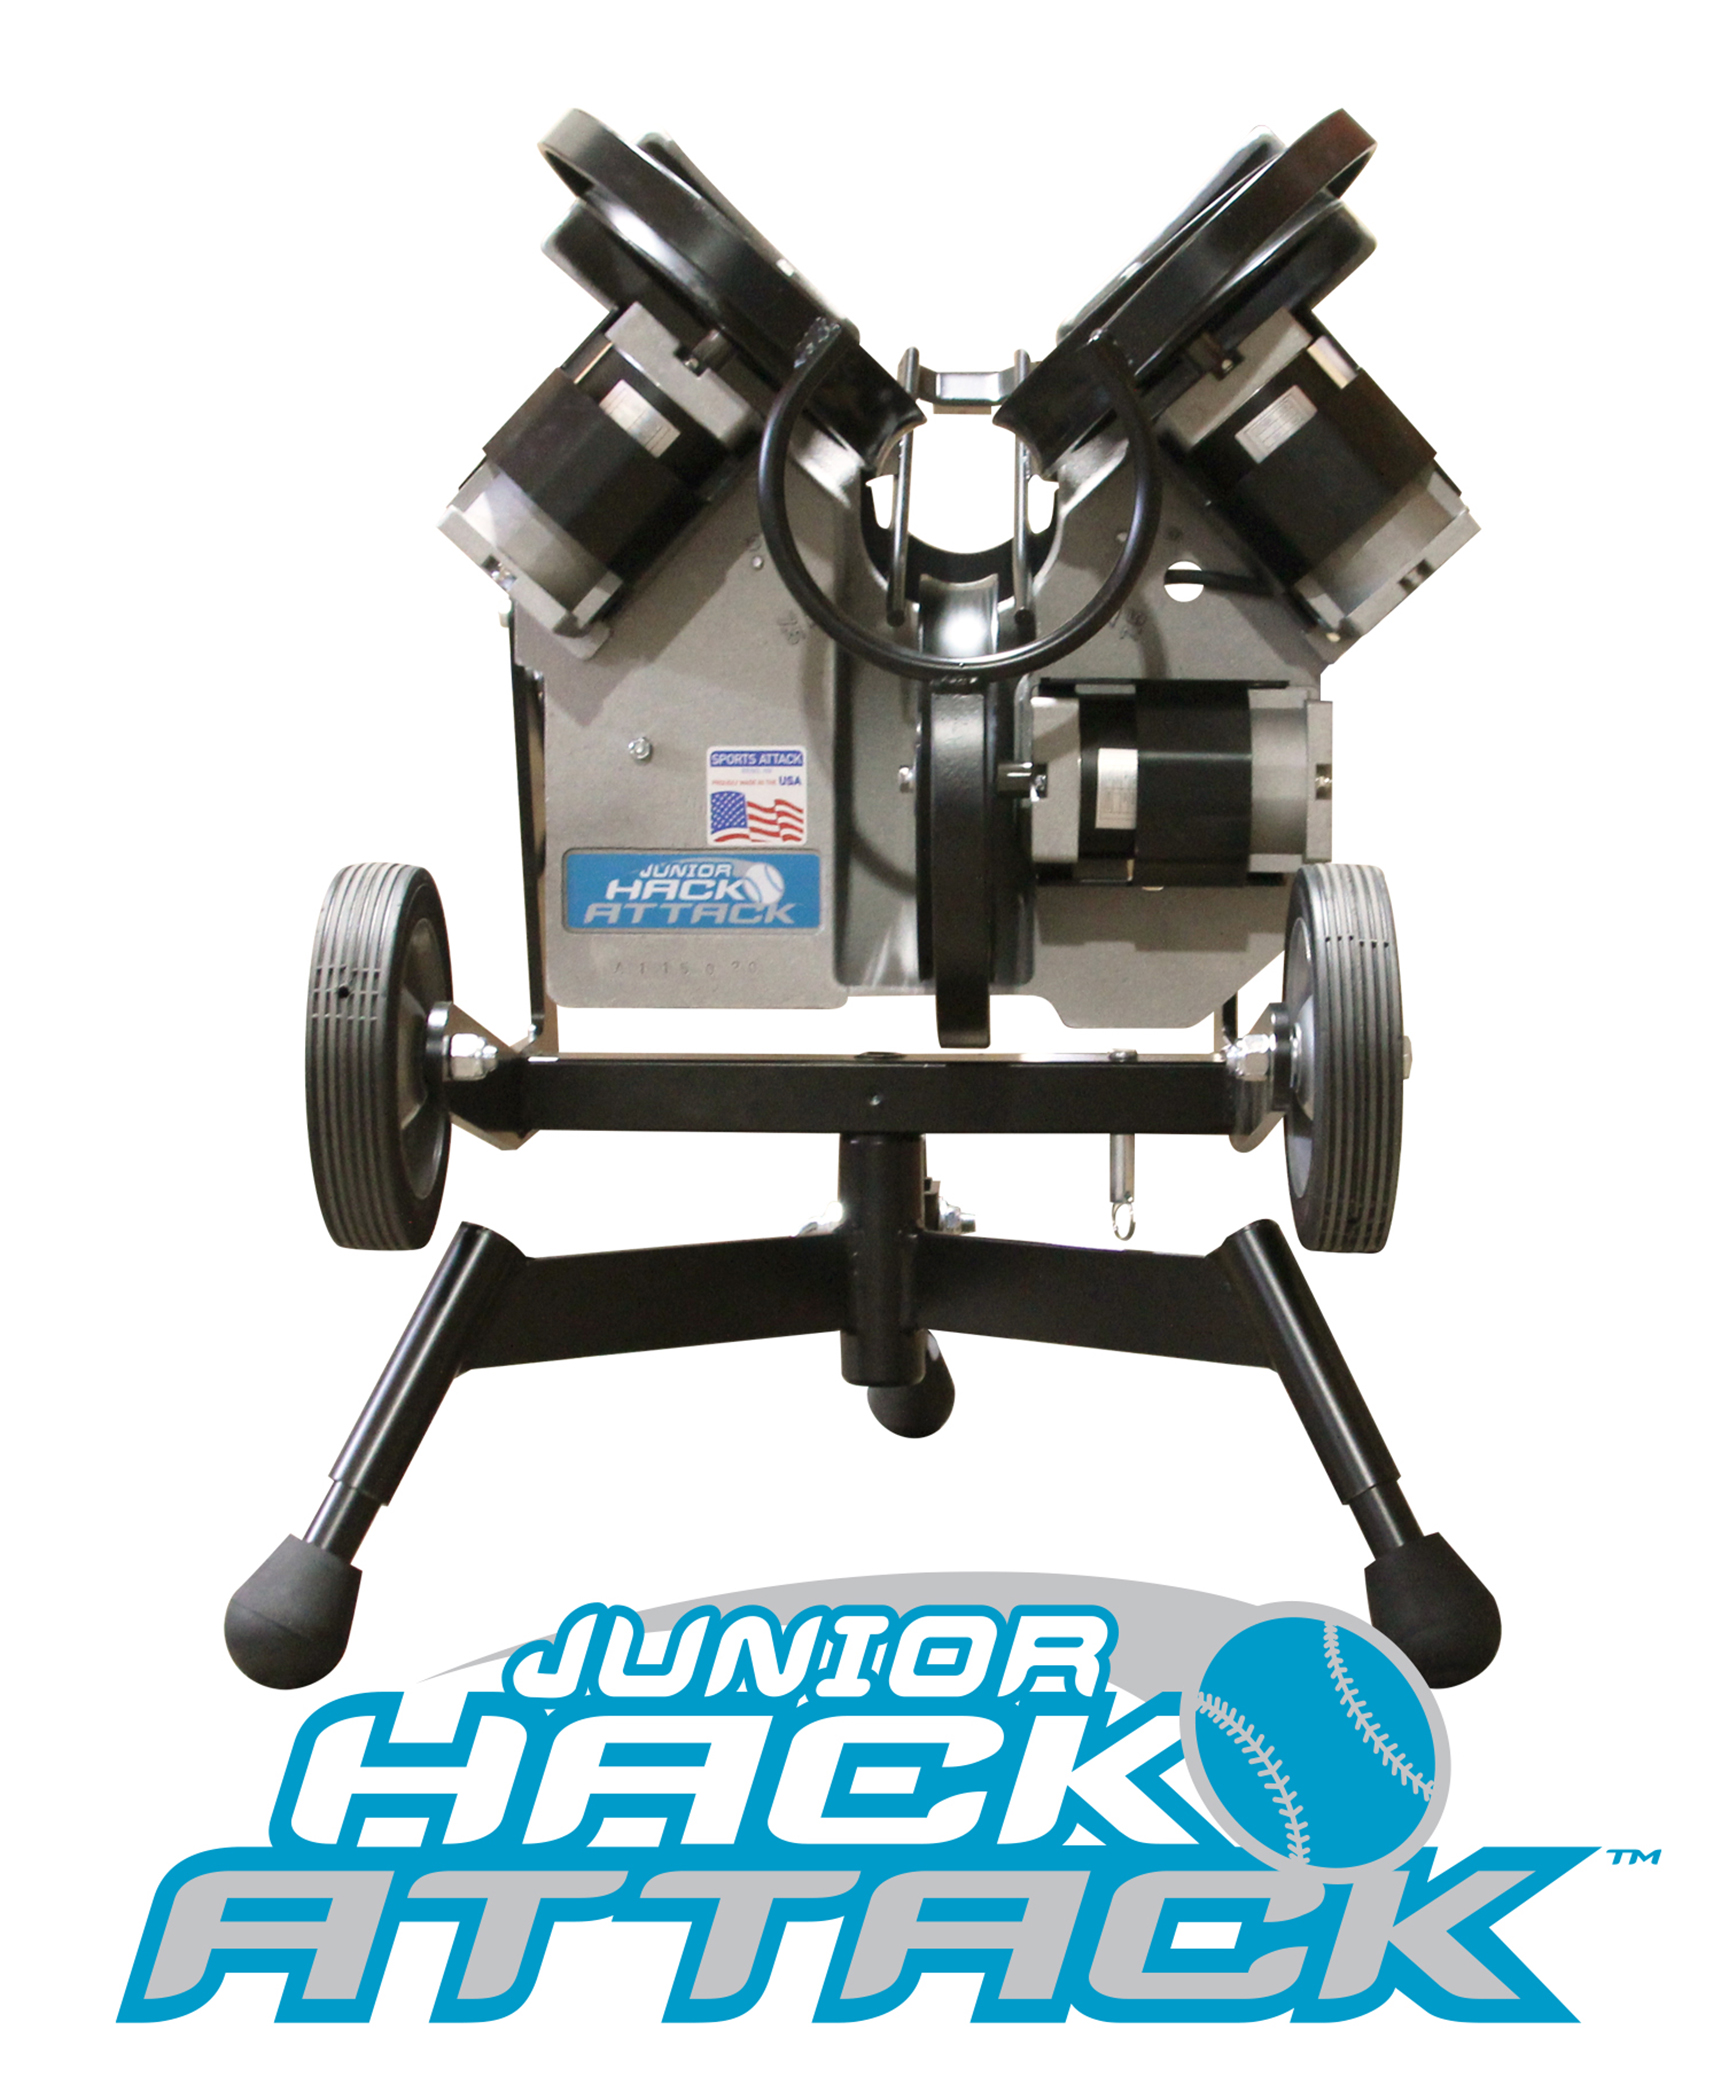 Hack Attack Softball Pitching Machine By Sports Attack 